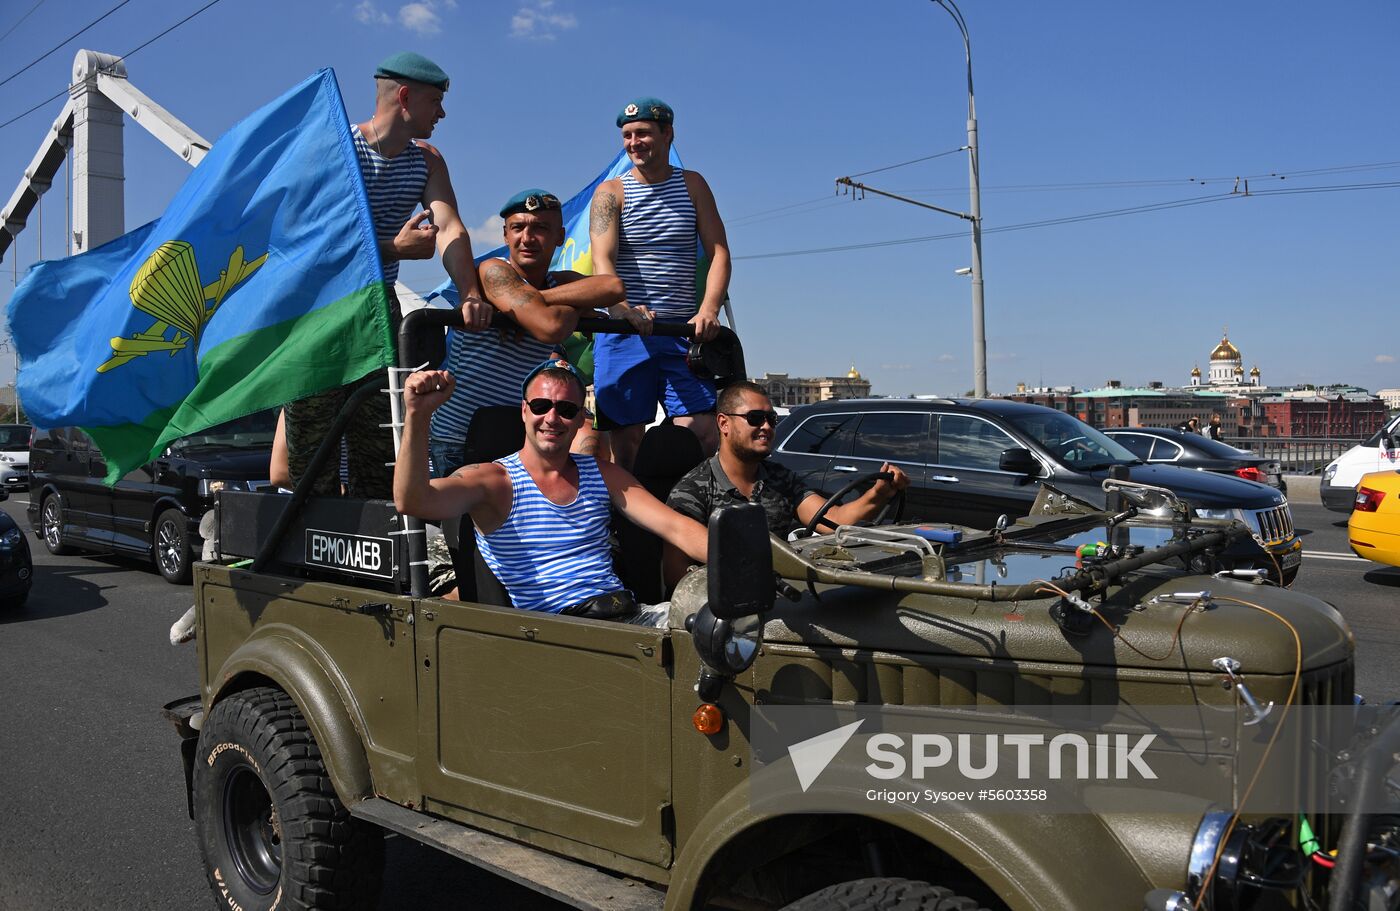 Paratroopers Day celebrations in Moscow